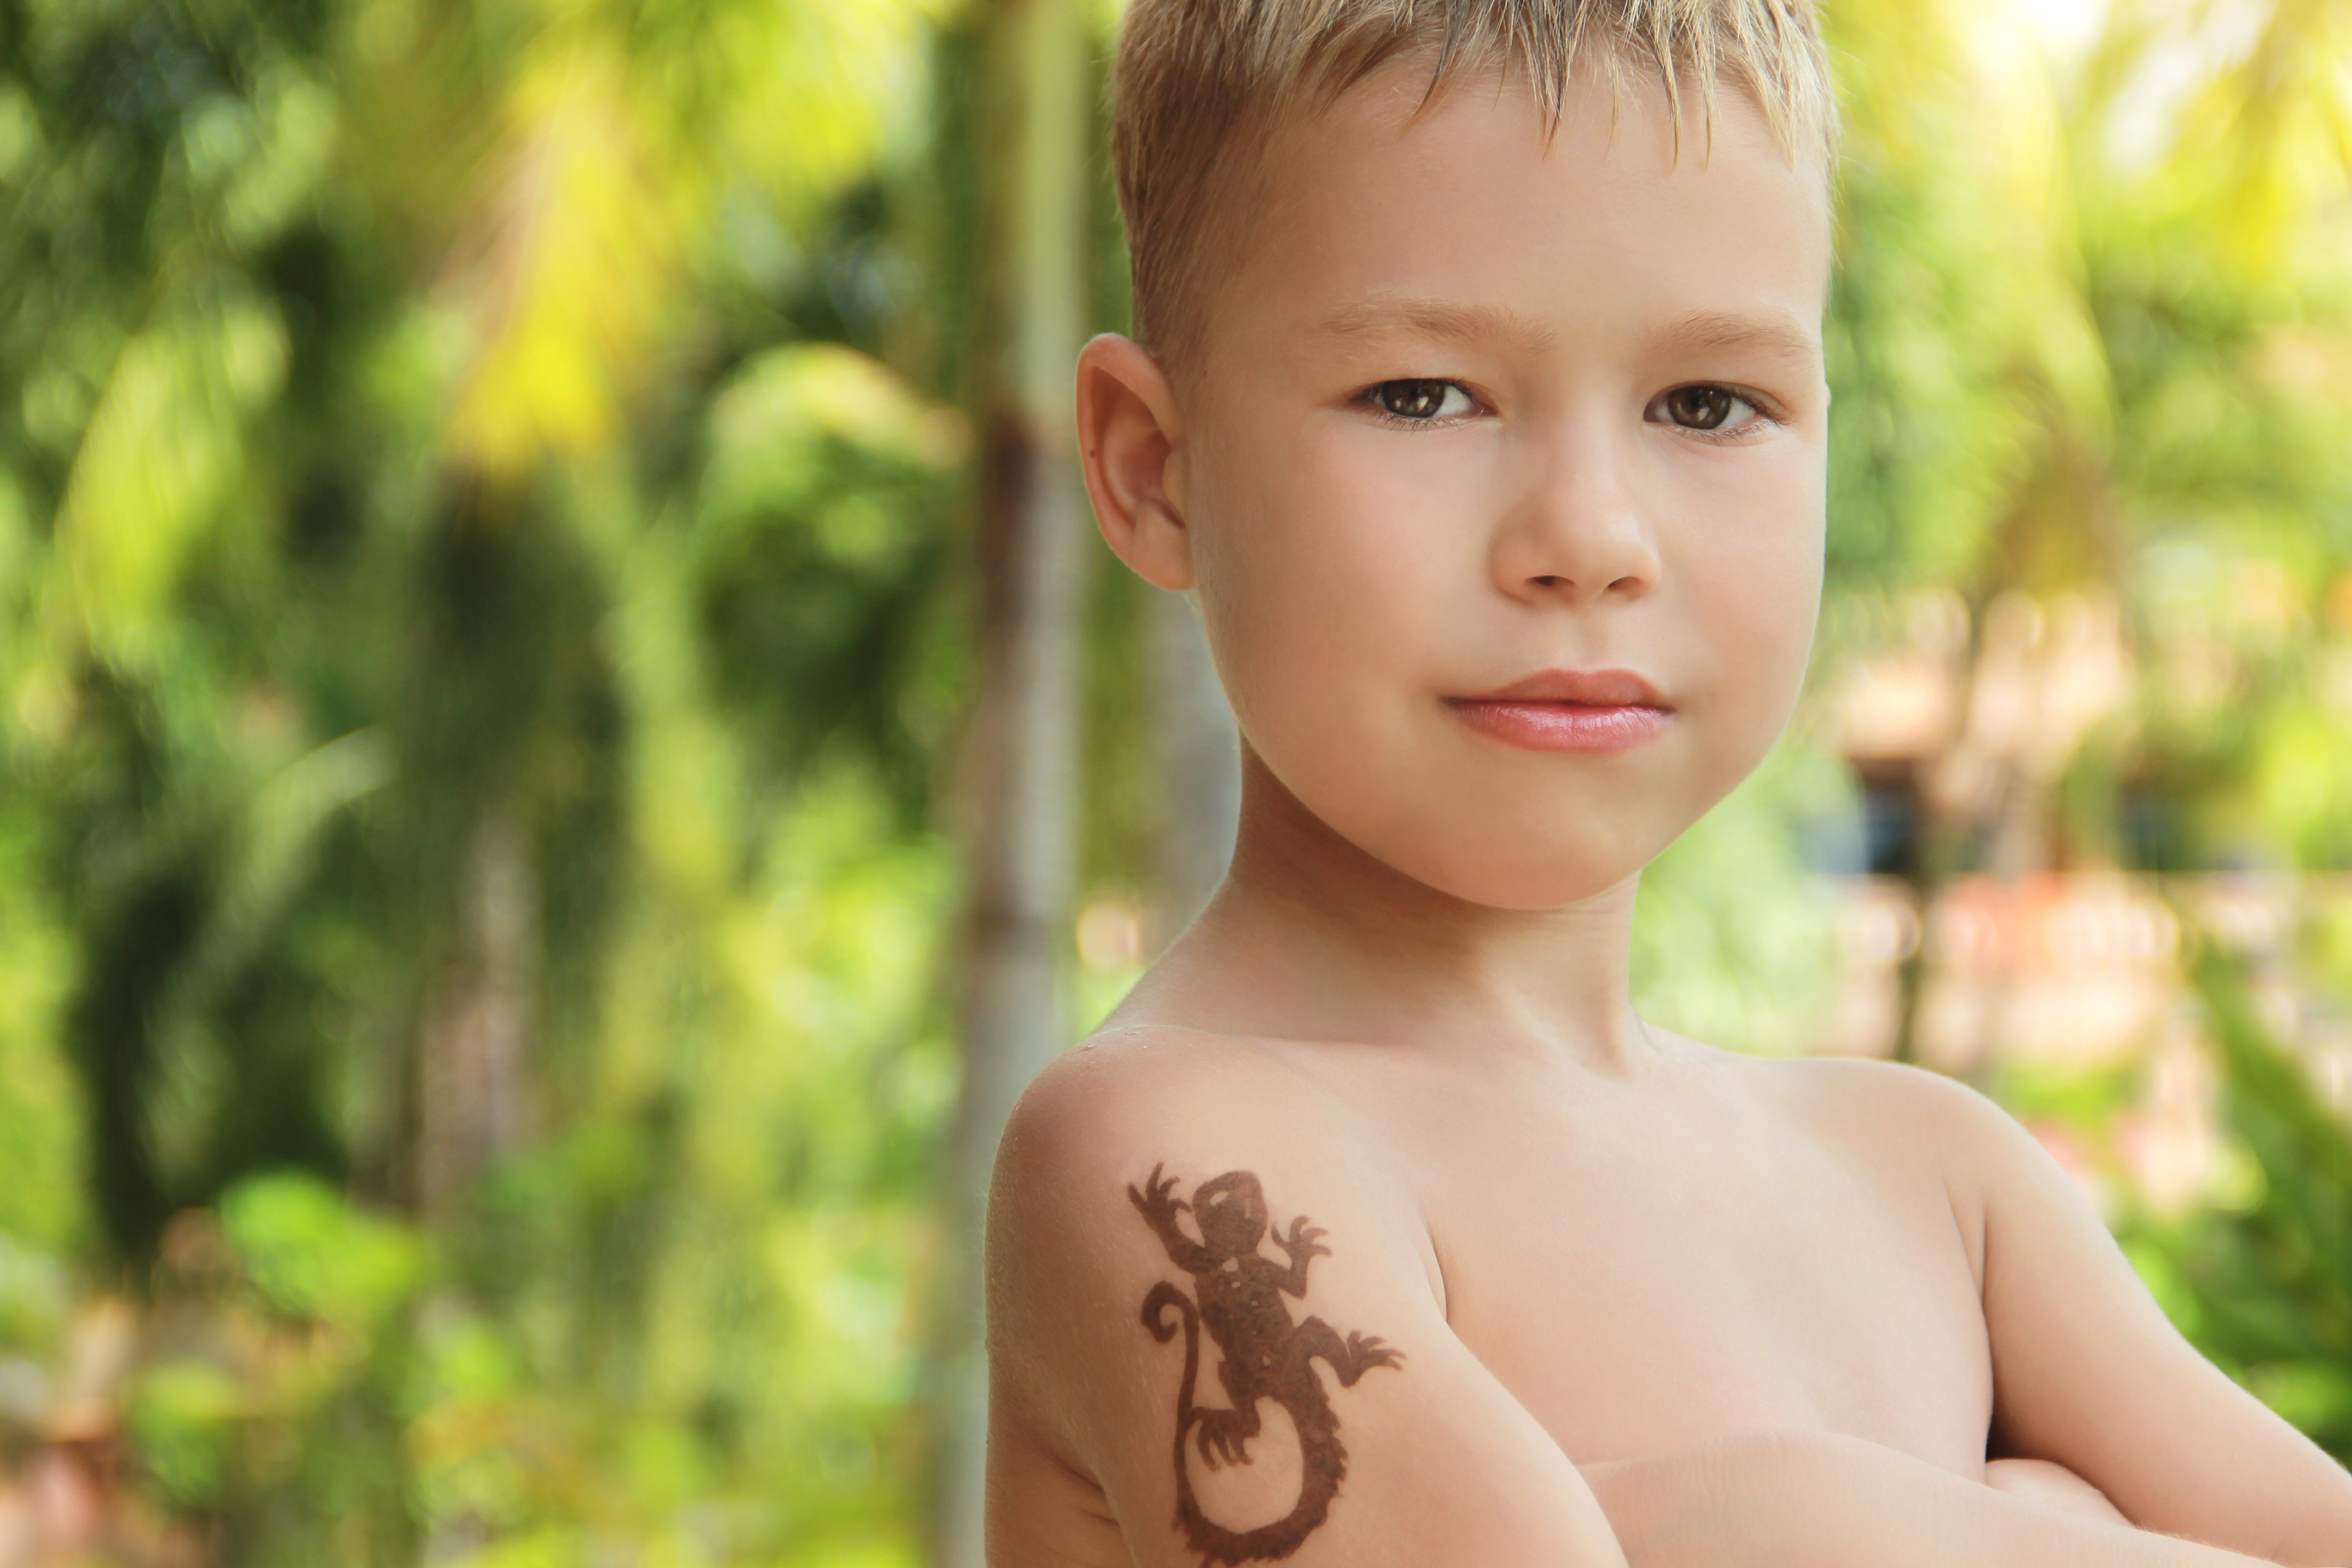 Describe PFD Patch: I Tried a Tattoo Removal Patch | The Healthy